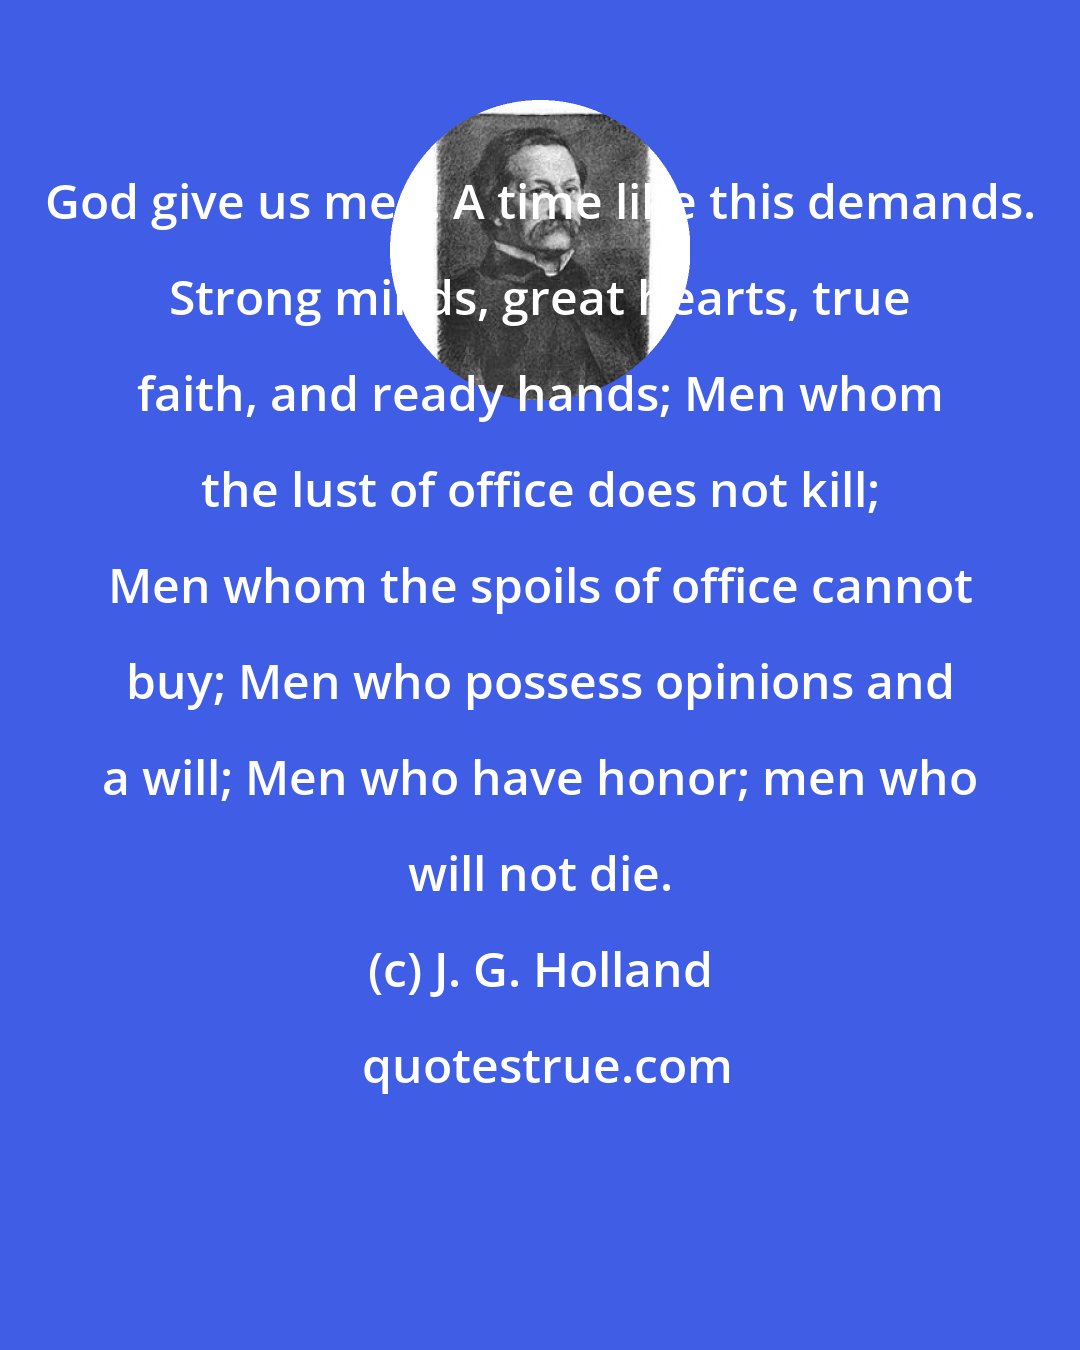 J. G. Holland: God give us men! A time like this demands. Strong minds, great hearts, true faith, and ready hands; Men whom the lust of office does not kill; Men whom the spoils of office cannot buy; Men who possess opinions and a will; Men who have honor; men who will not die.